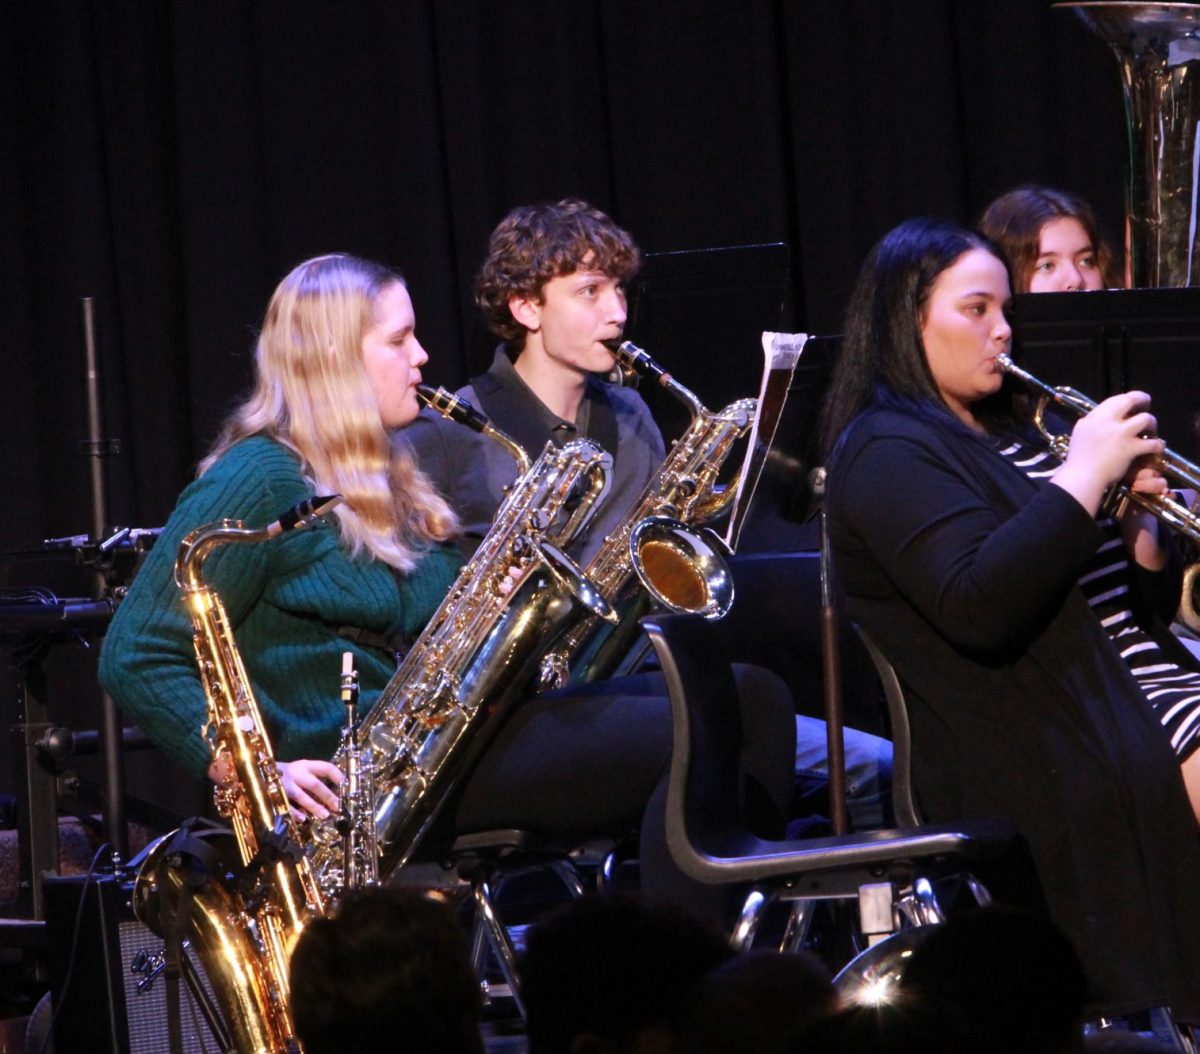 Alto sax players Molly Clauser (9) and Dalton Cain (10) and trumpet Kyle Baca playing Collective Christmas.